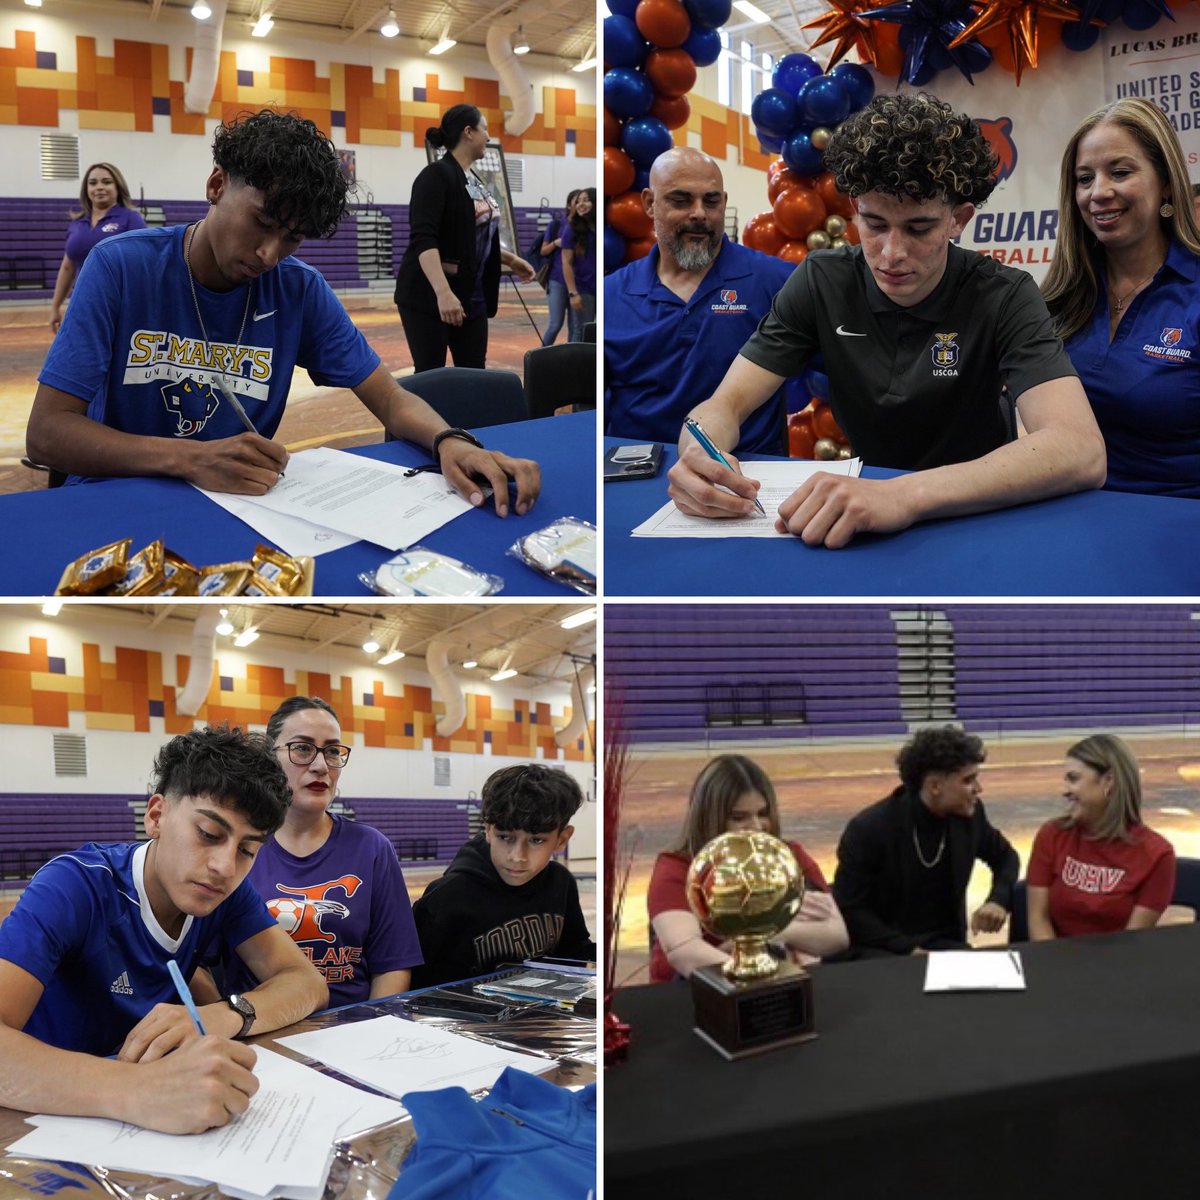 Eastlake High School had numerous student-athletes sign their letters of intent to play sports and continue their education at the collegiate level. Great job, Falcons!